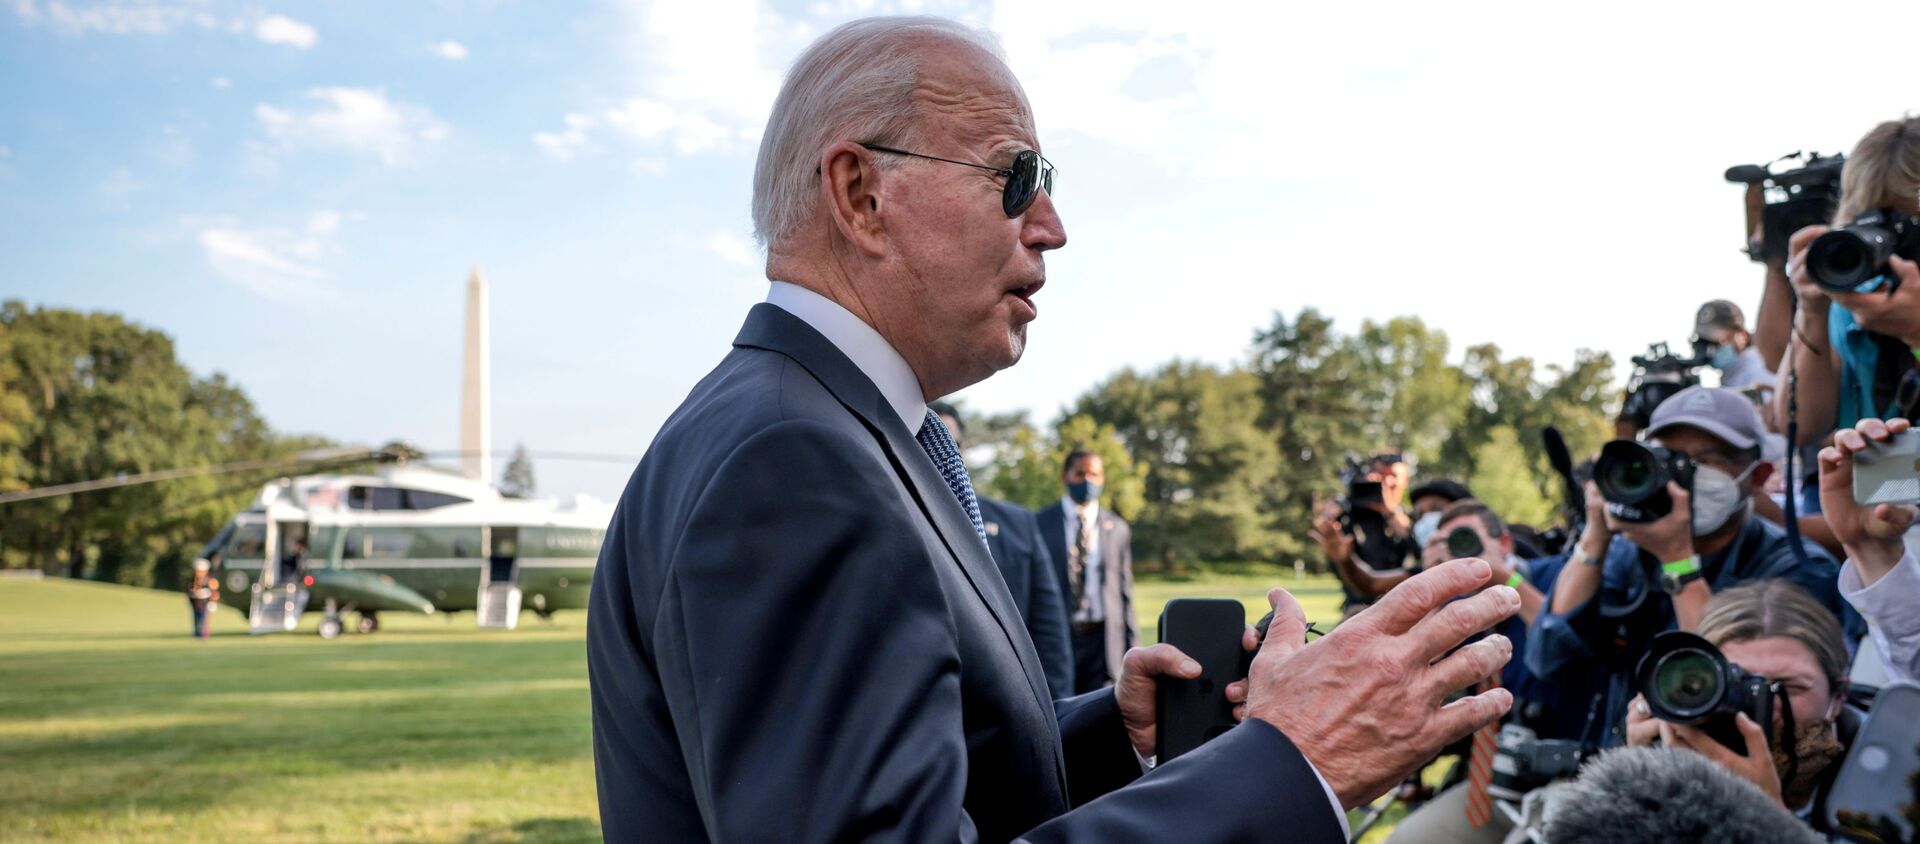 U.S. President Joe Biden speaks to reporters outside the White House in Washington, U.S., before departing the White House for a weekend in Camp David, July 30, 2021. REUTERS/Evelyn Hockstein - Sputnik International, 1920, 01.08.2021